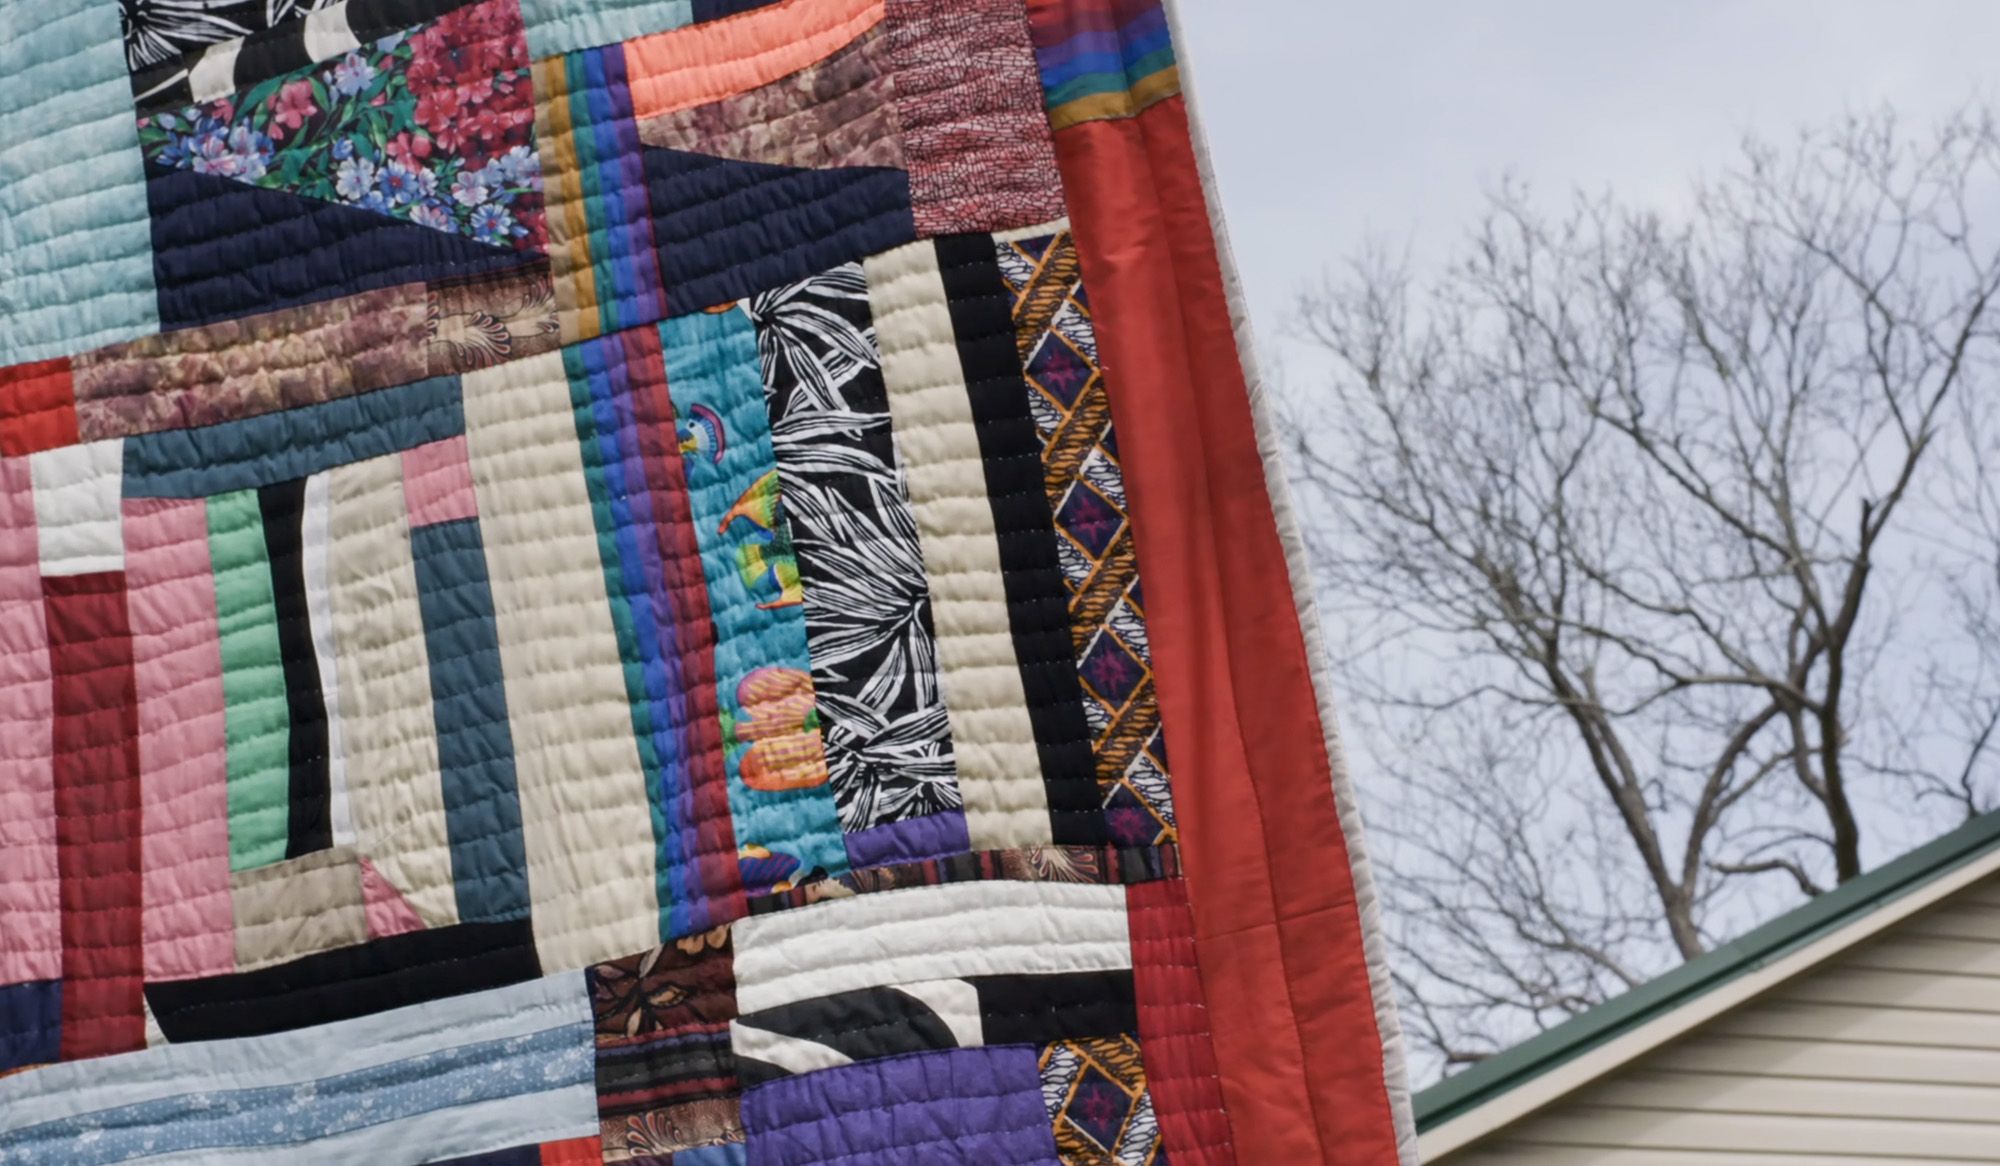 A trip to Gee’s Bend, Alabama, where masterpieces hang from clotheslines | Psyche